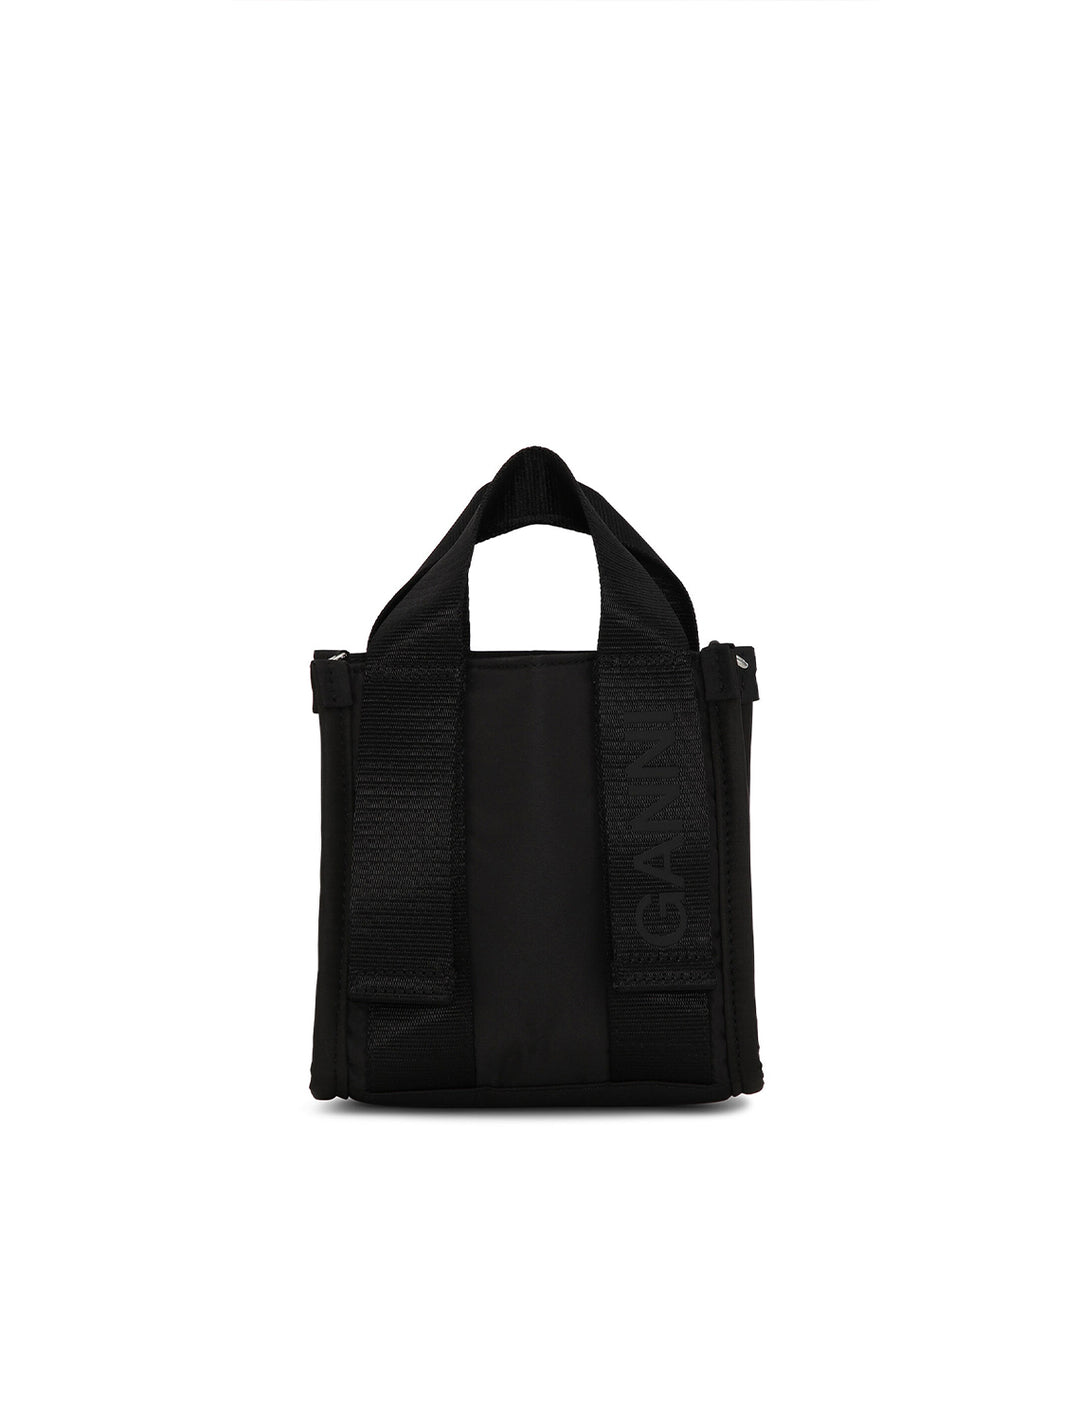 Front view of GANNI's recycled tech mini satchel in black.